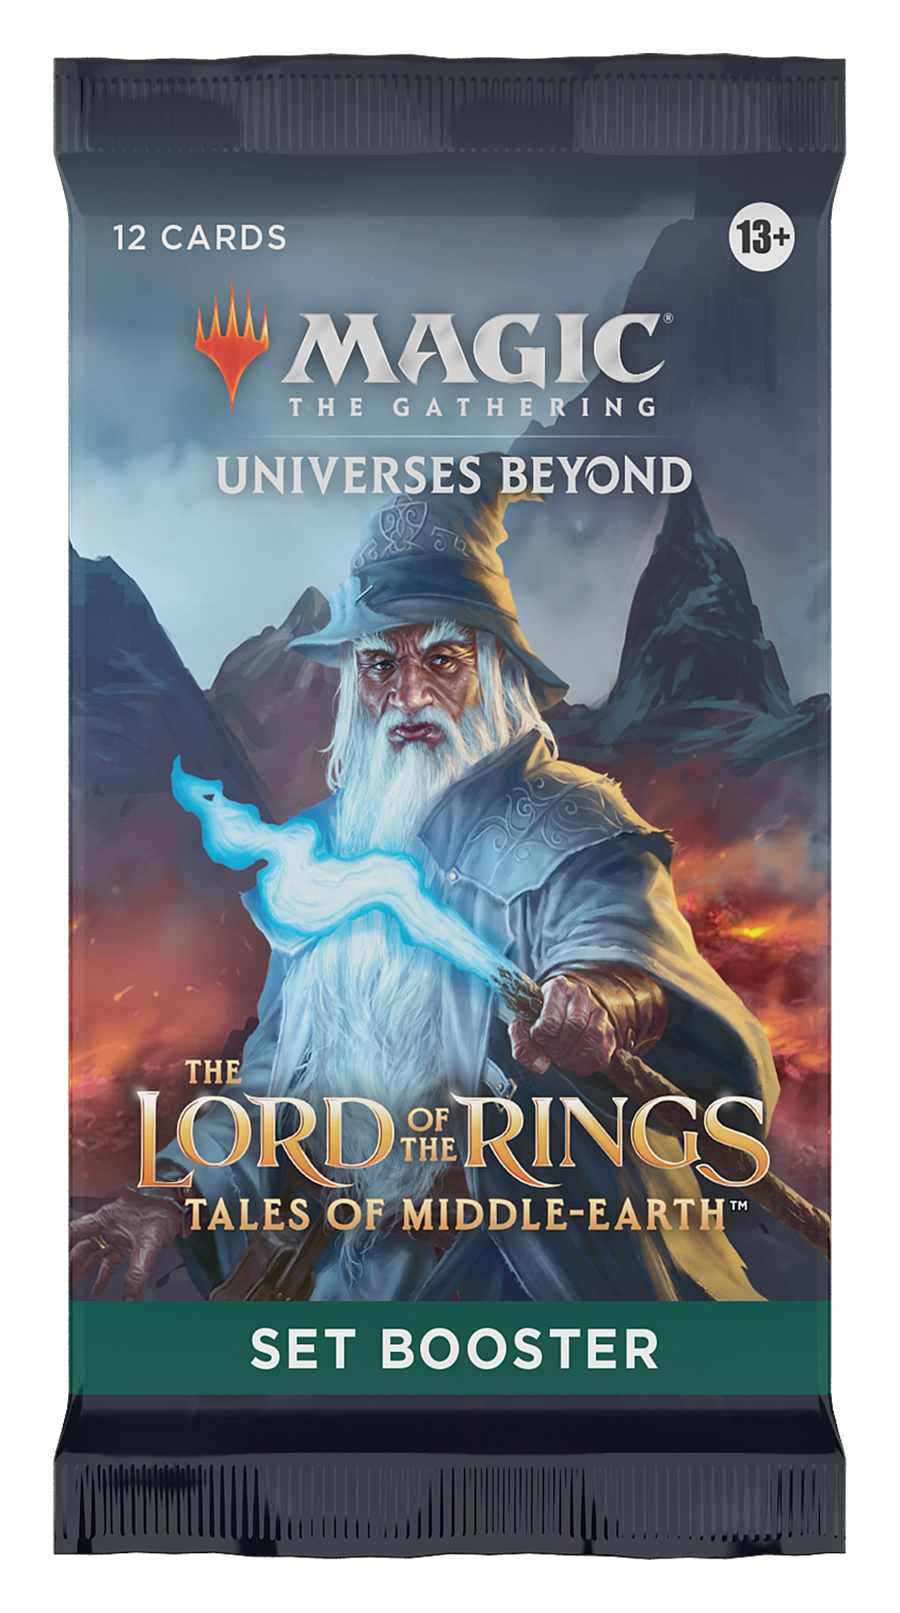 LTR - MTG - Set Booster Pack - Universes Beyond: The Lord of the Rings: Tales of Middle-earth - Magic the Gathering